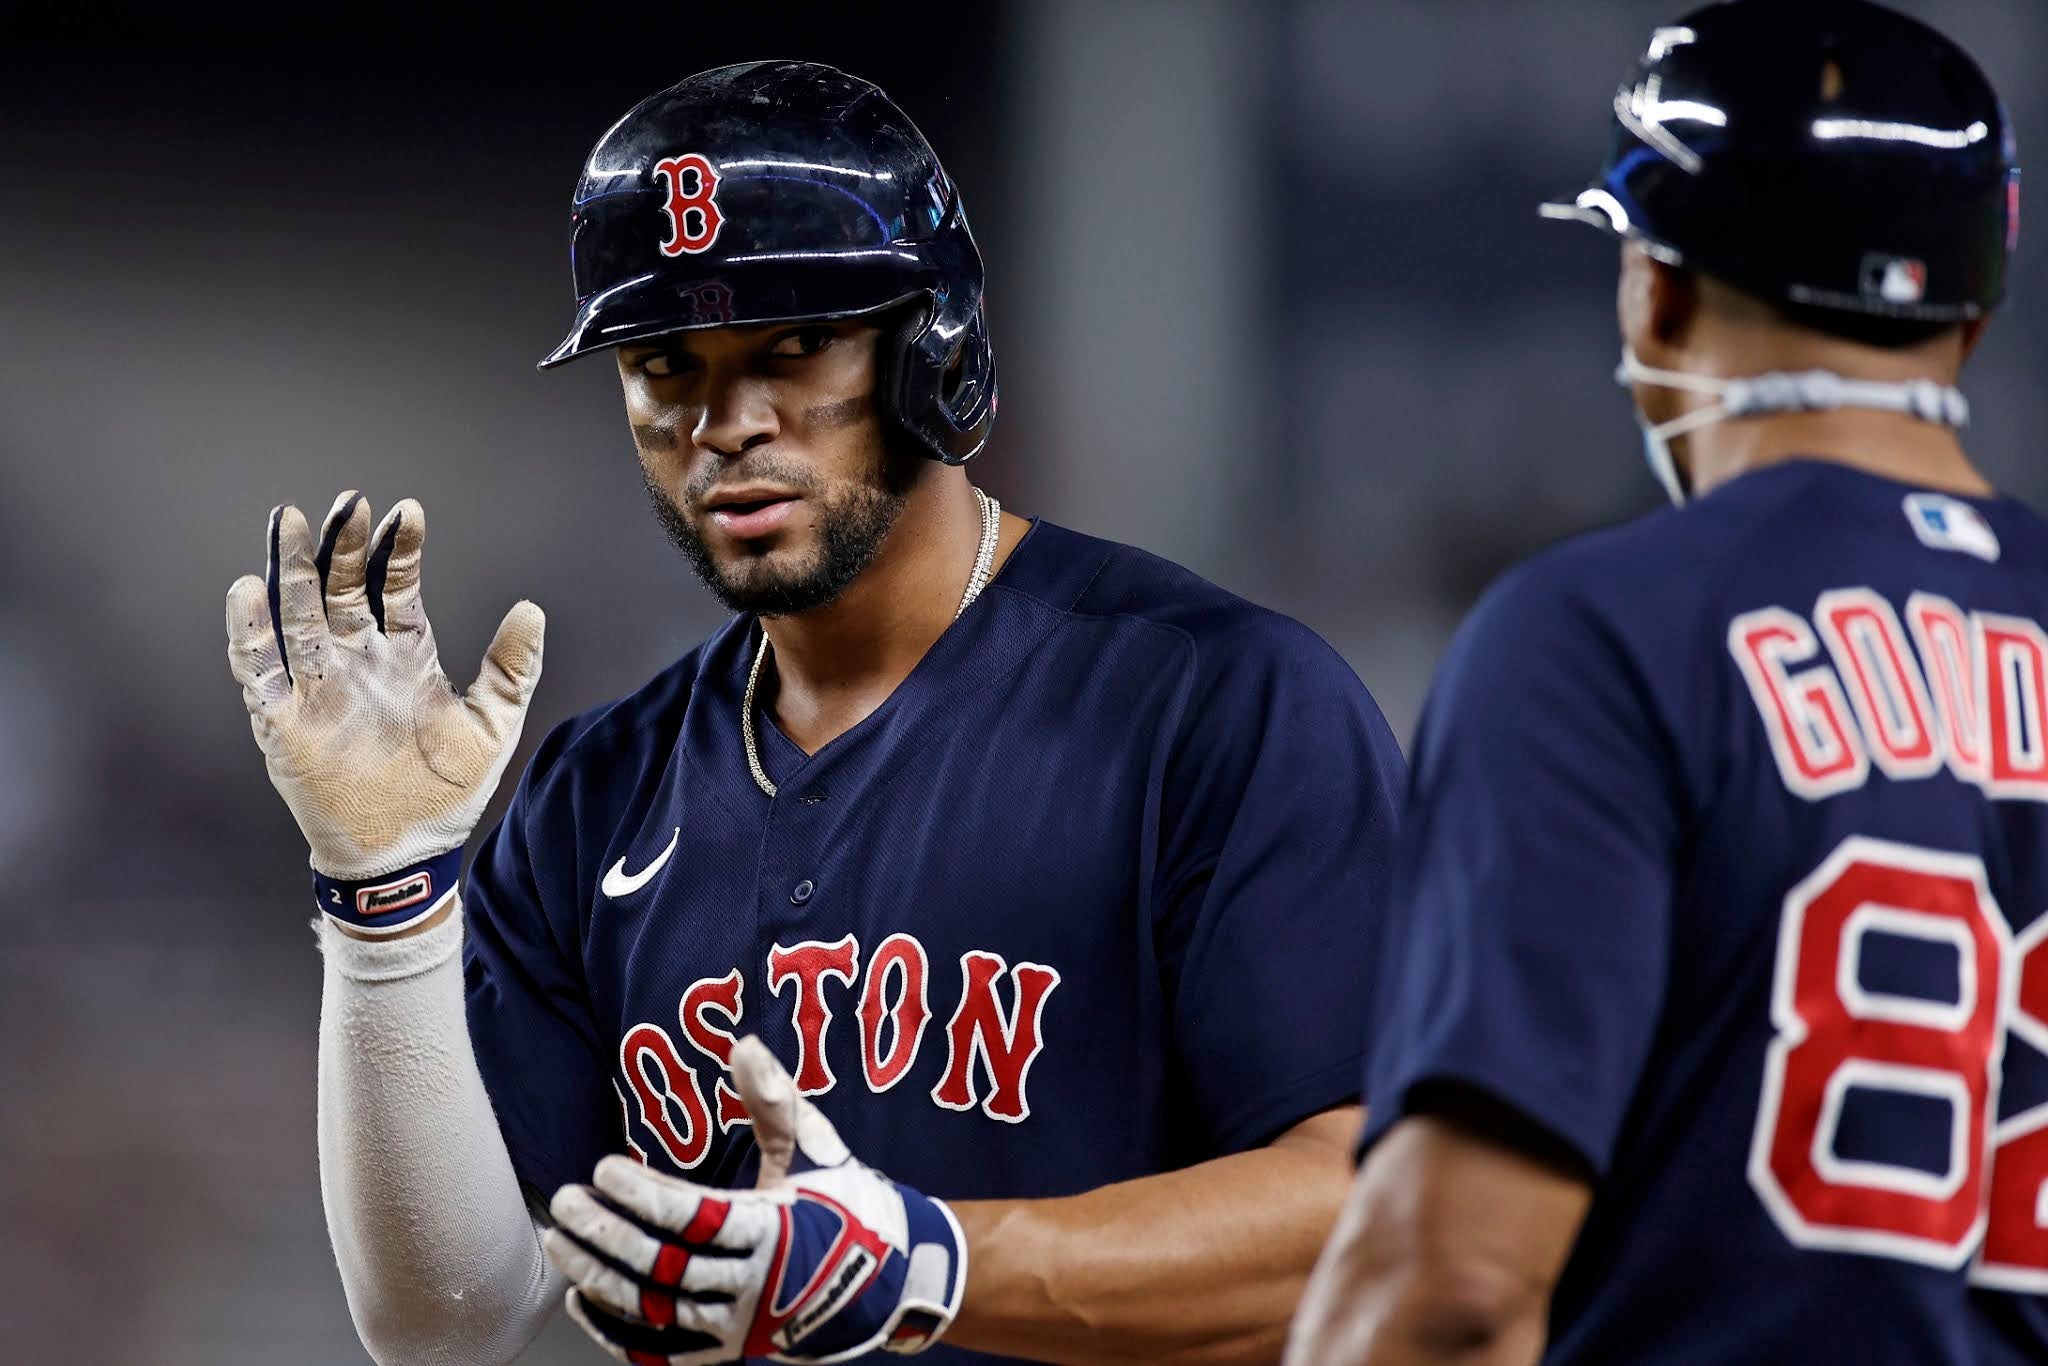 Old-School Stats Or Fancy-Pants Analytics? The Red Sox Have An